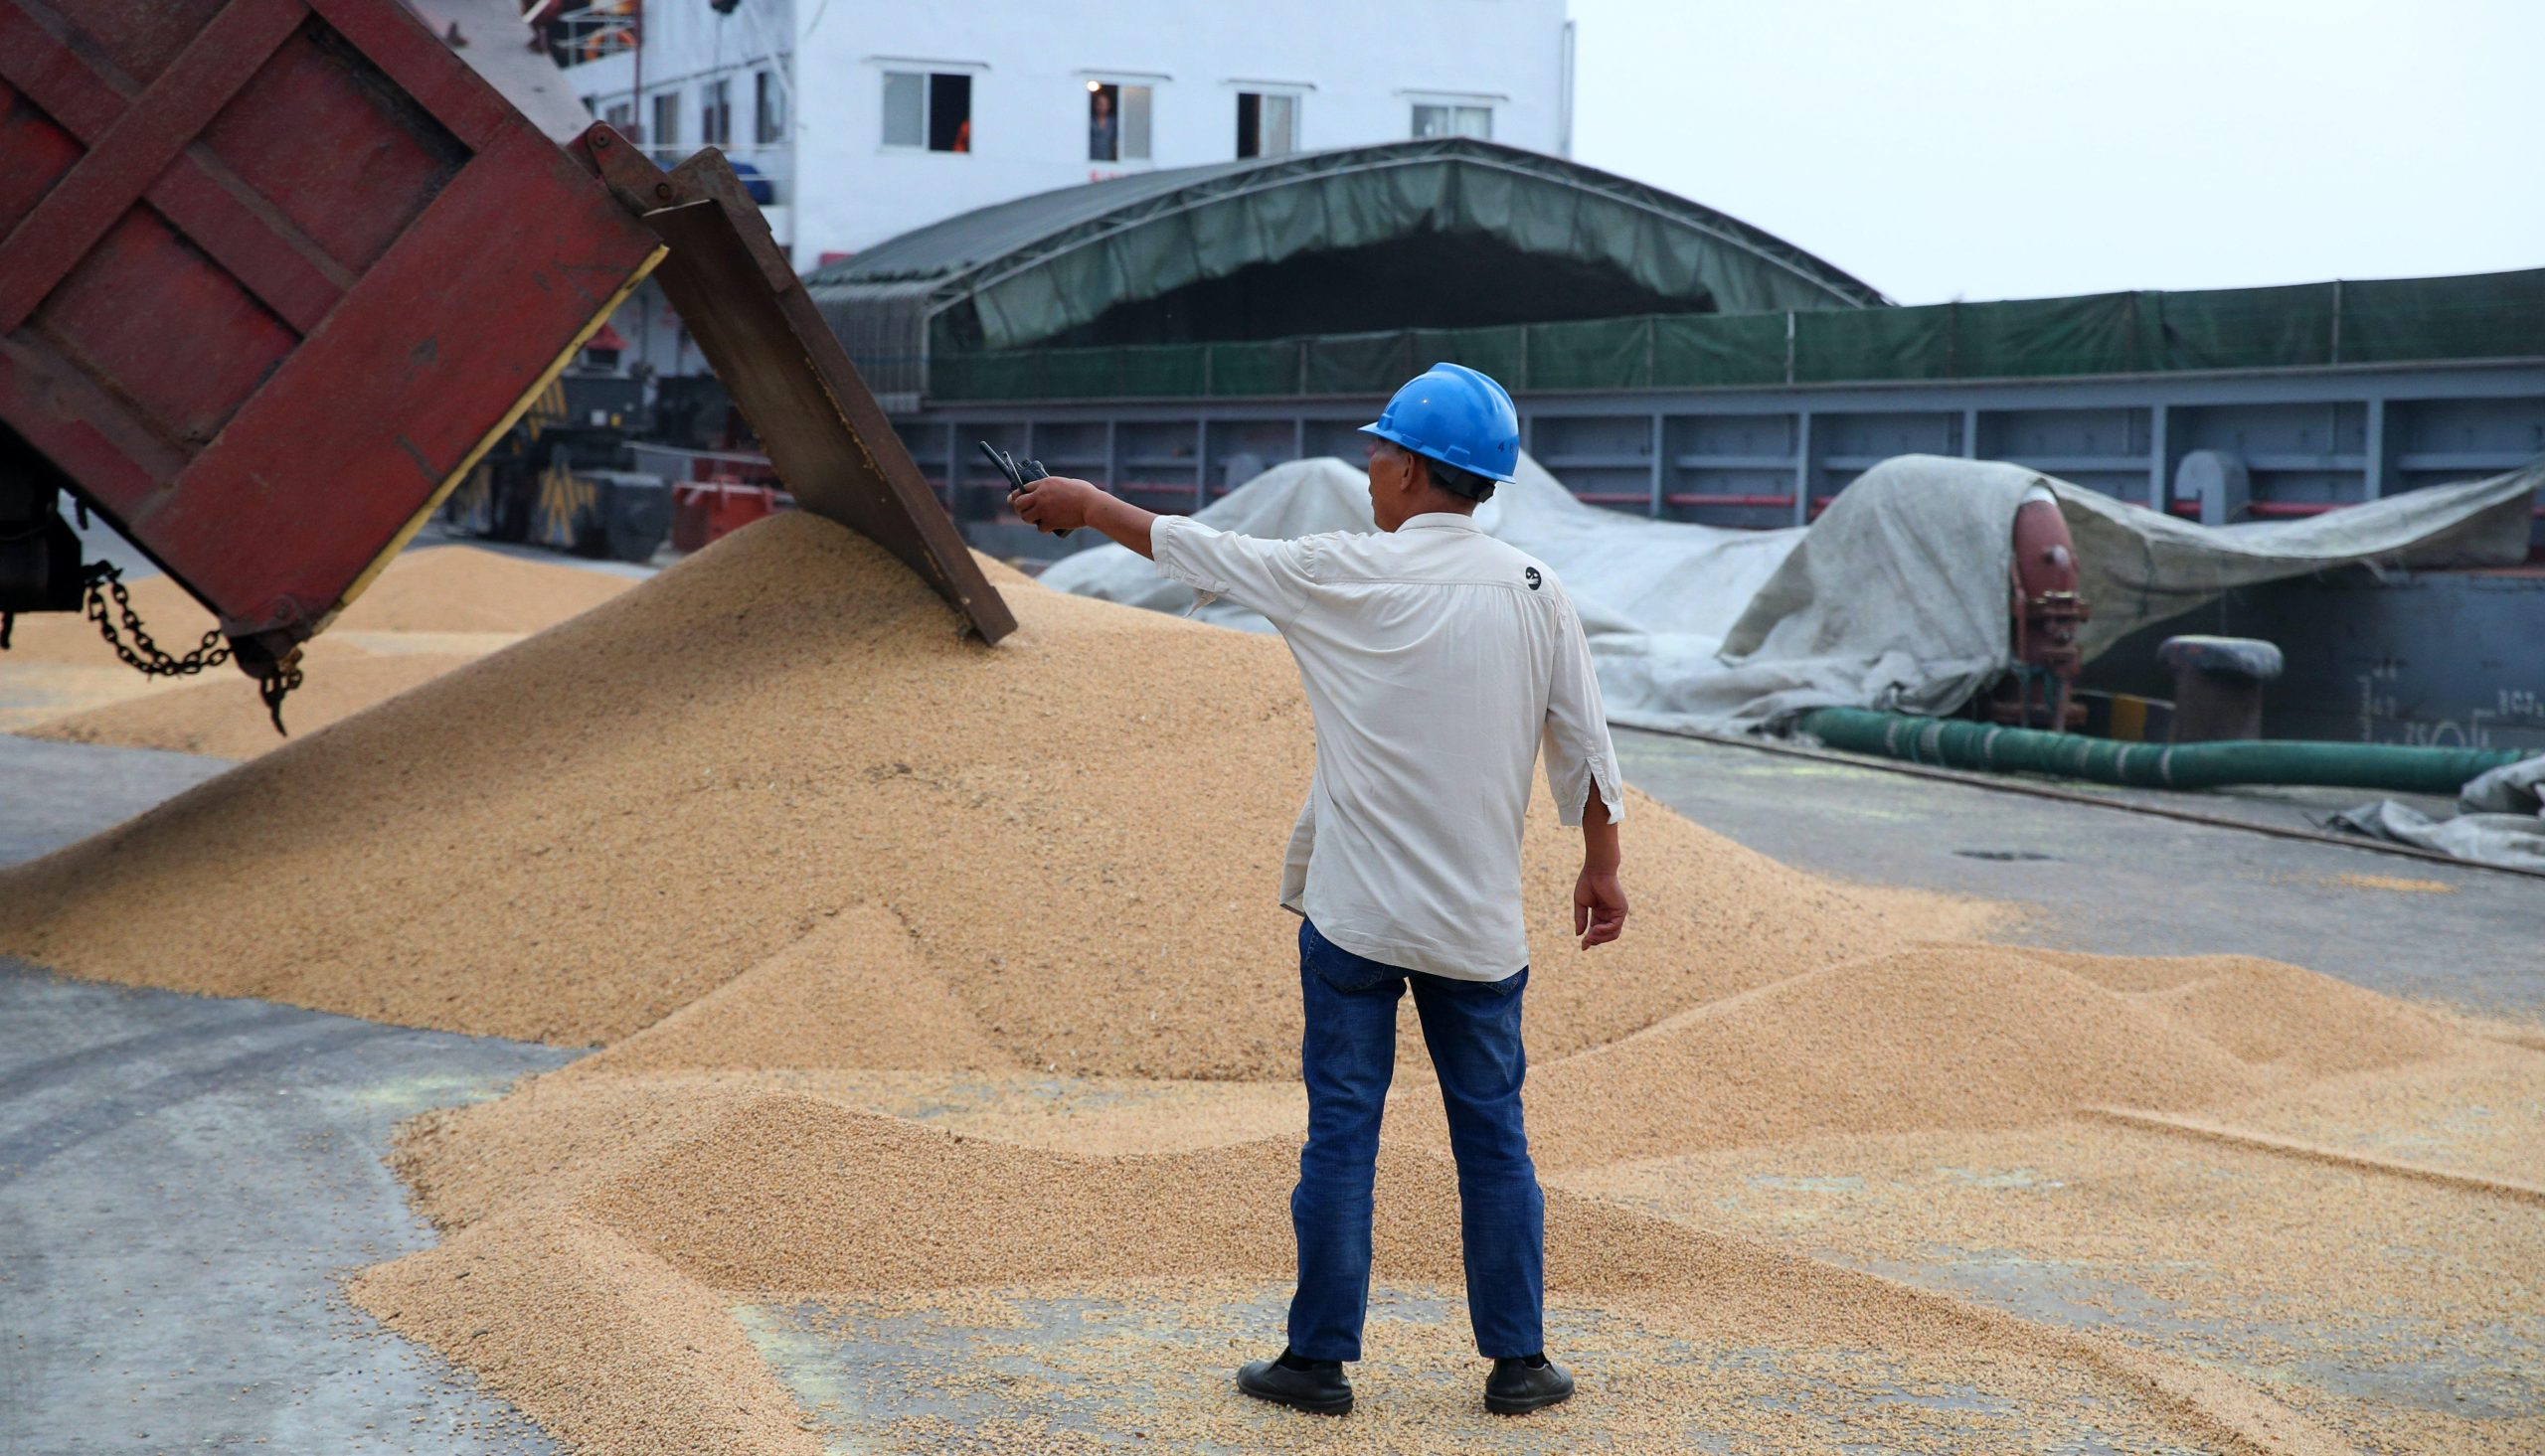 <p>Soybeans imported from Brazil are unloaded in Nantong, in China’s Jiangsu province. A new study has explored the relationship between environmental and social protections in the Amazon, Chinese investment and price changes (Image: Zuma Press / Alamy)</p>